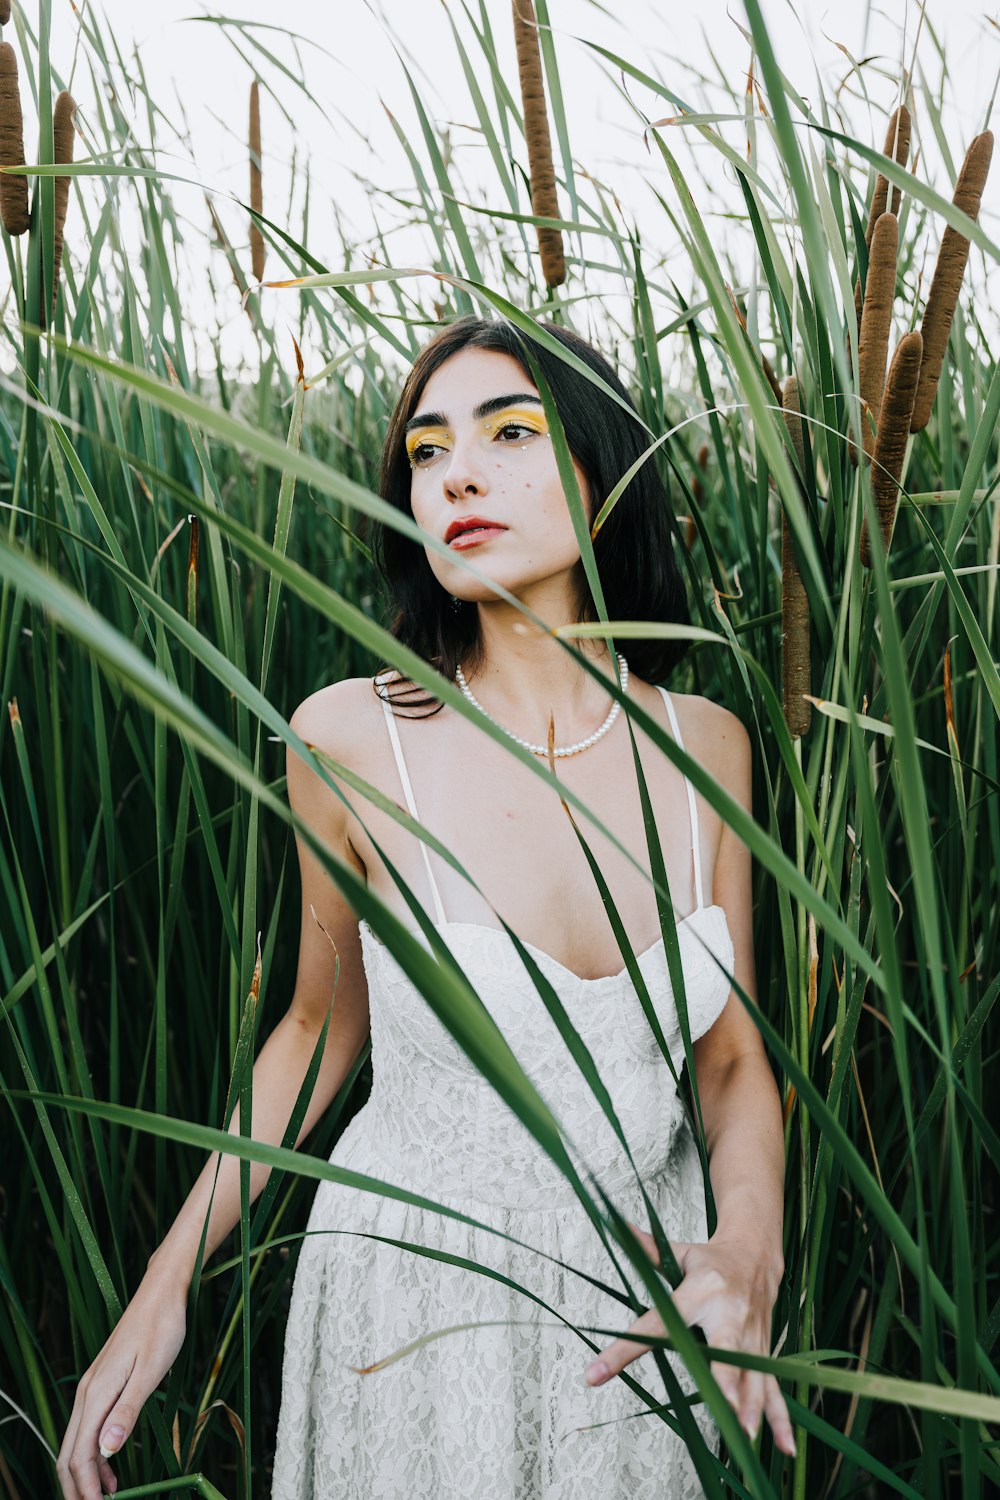 a woman in a white dress standing in tall grass